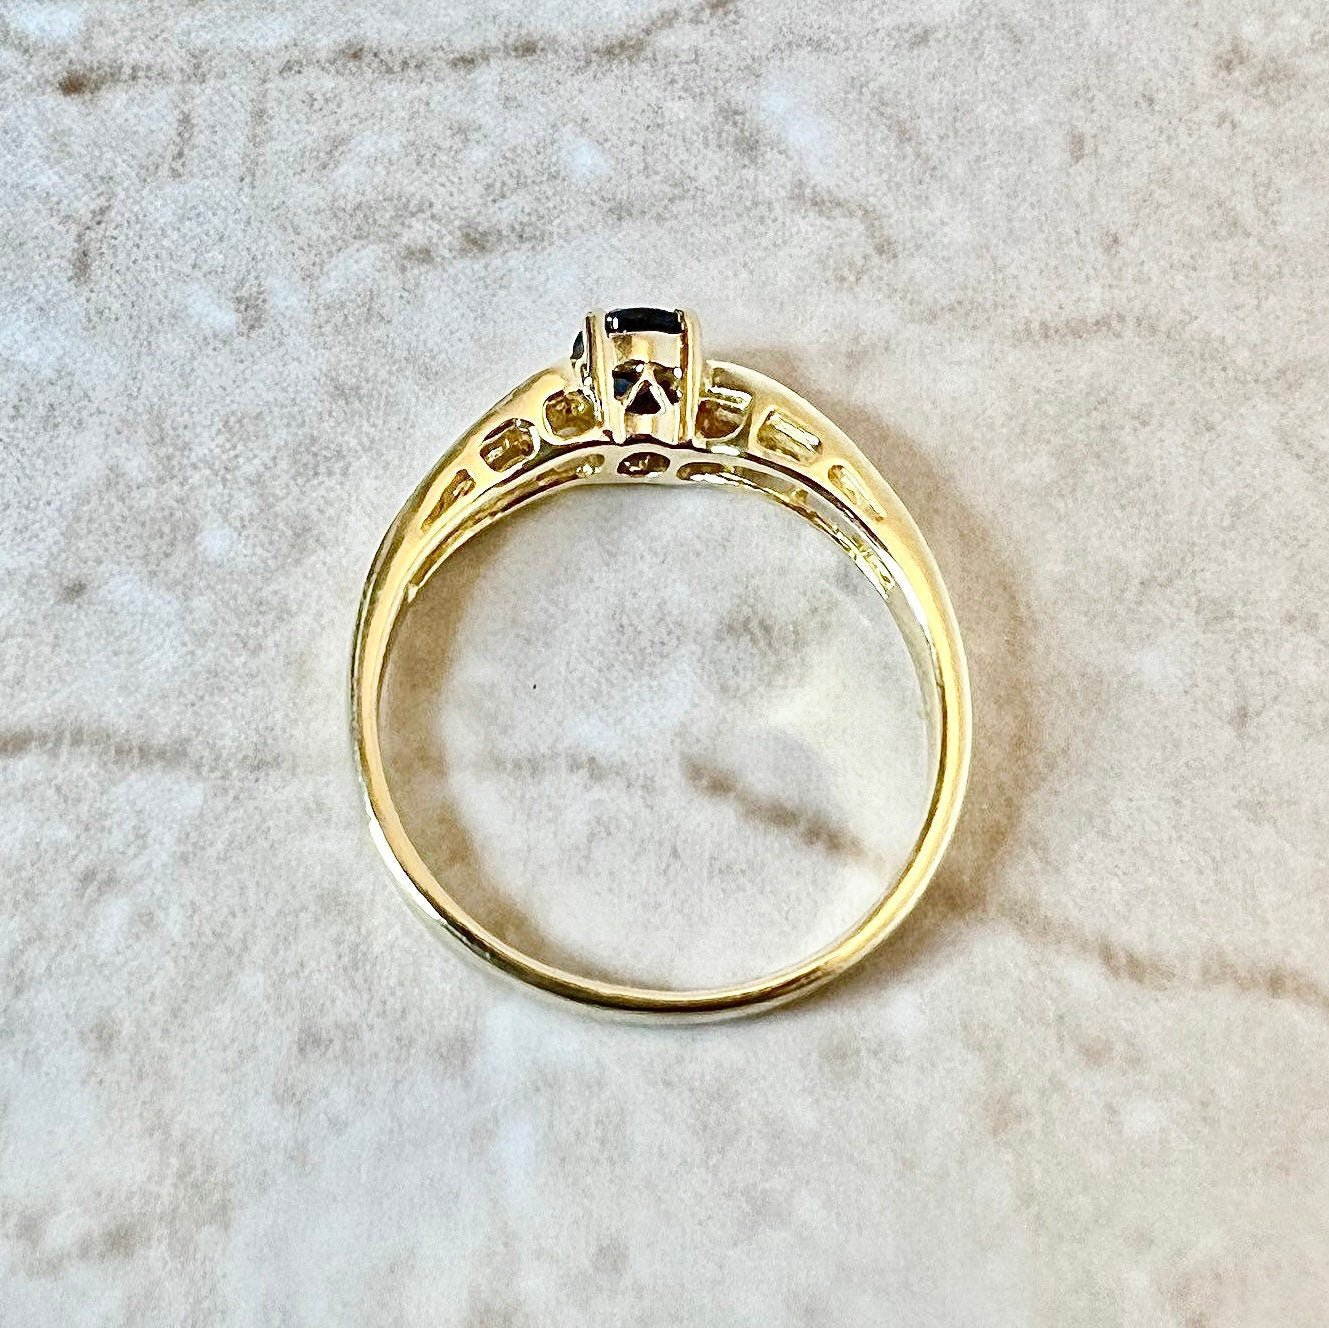 Fine Vintage 18K Sapphire Solitaire Ring - Yellow Gold Cocktail Ring - Engagement Ring - September Birthstone - Birthday Gift - Holiday Gift